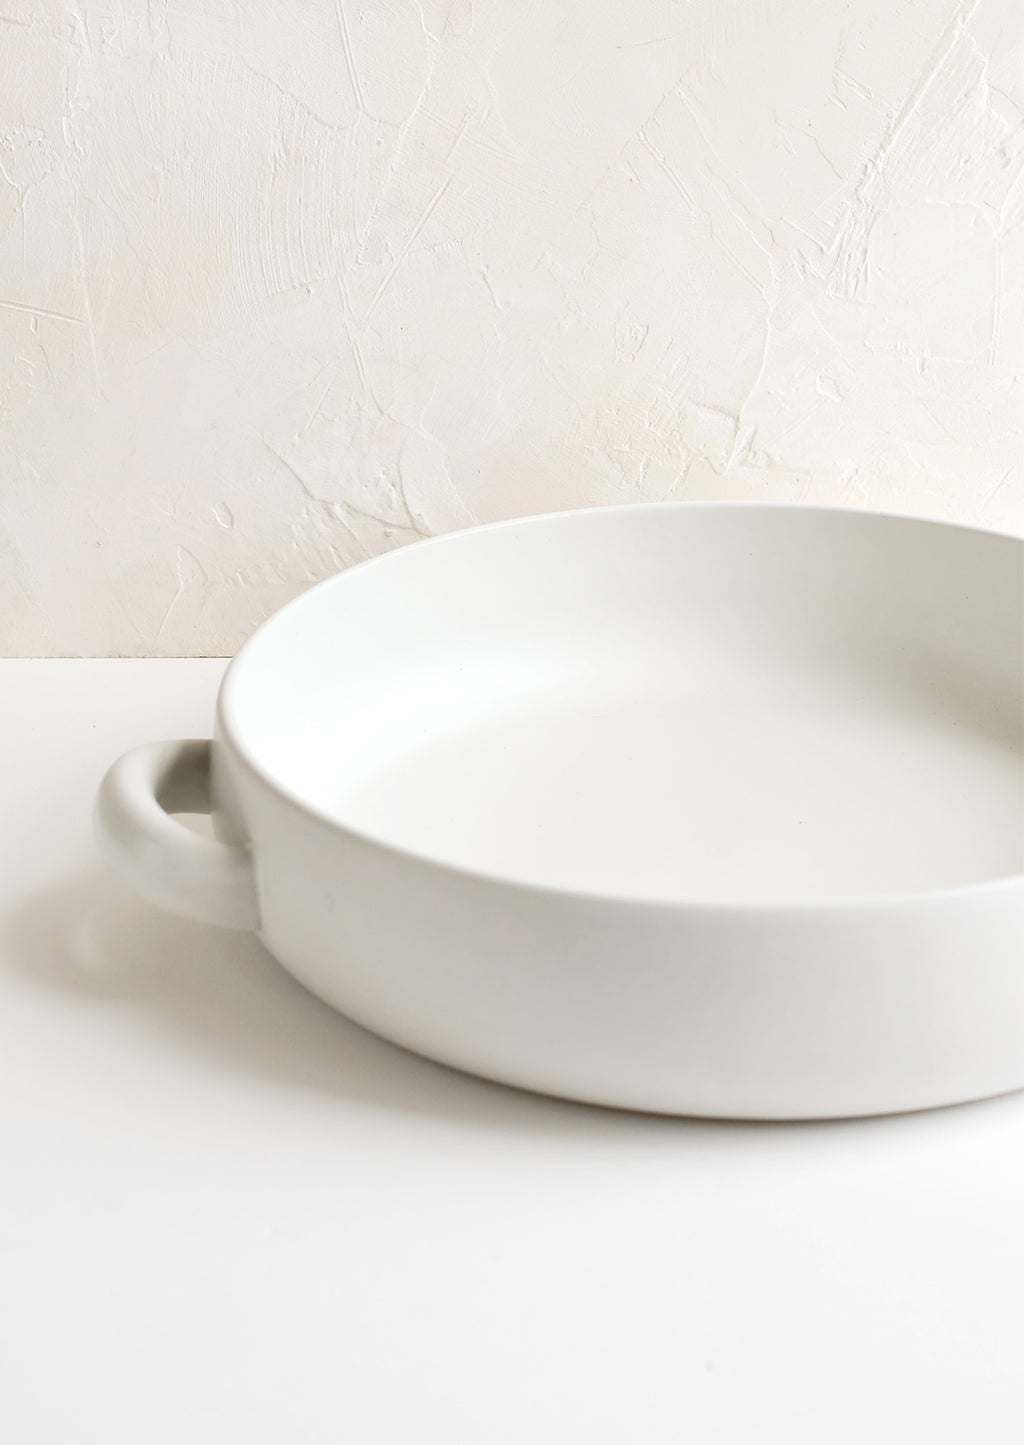 2: A round, shallow extra large serving bowl in white ceramic with curved handles at sides.